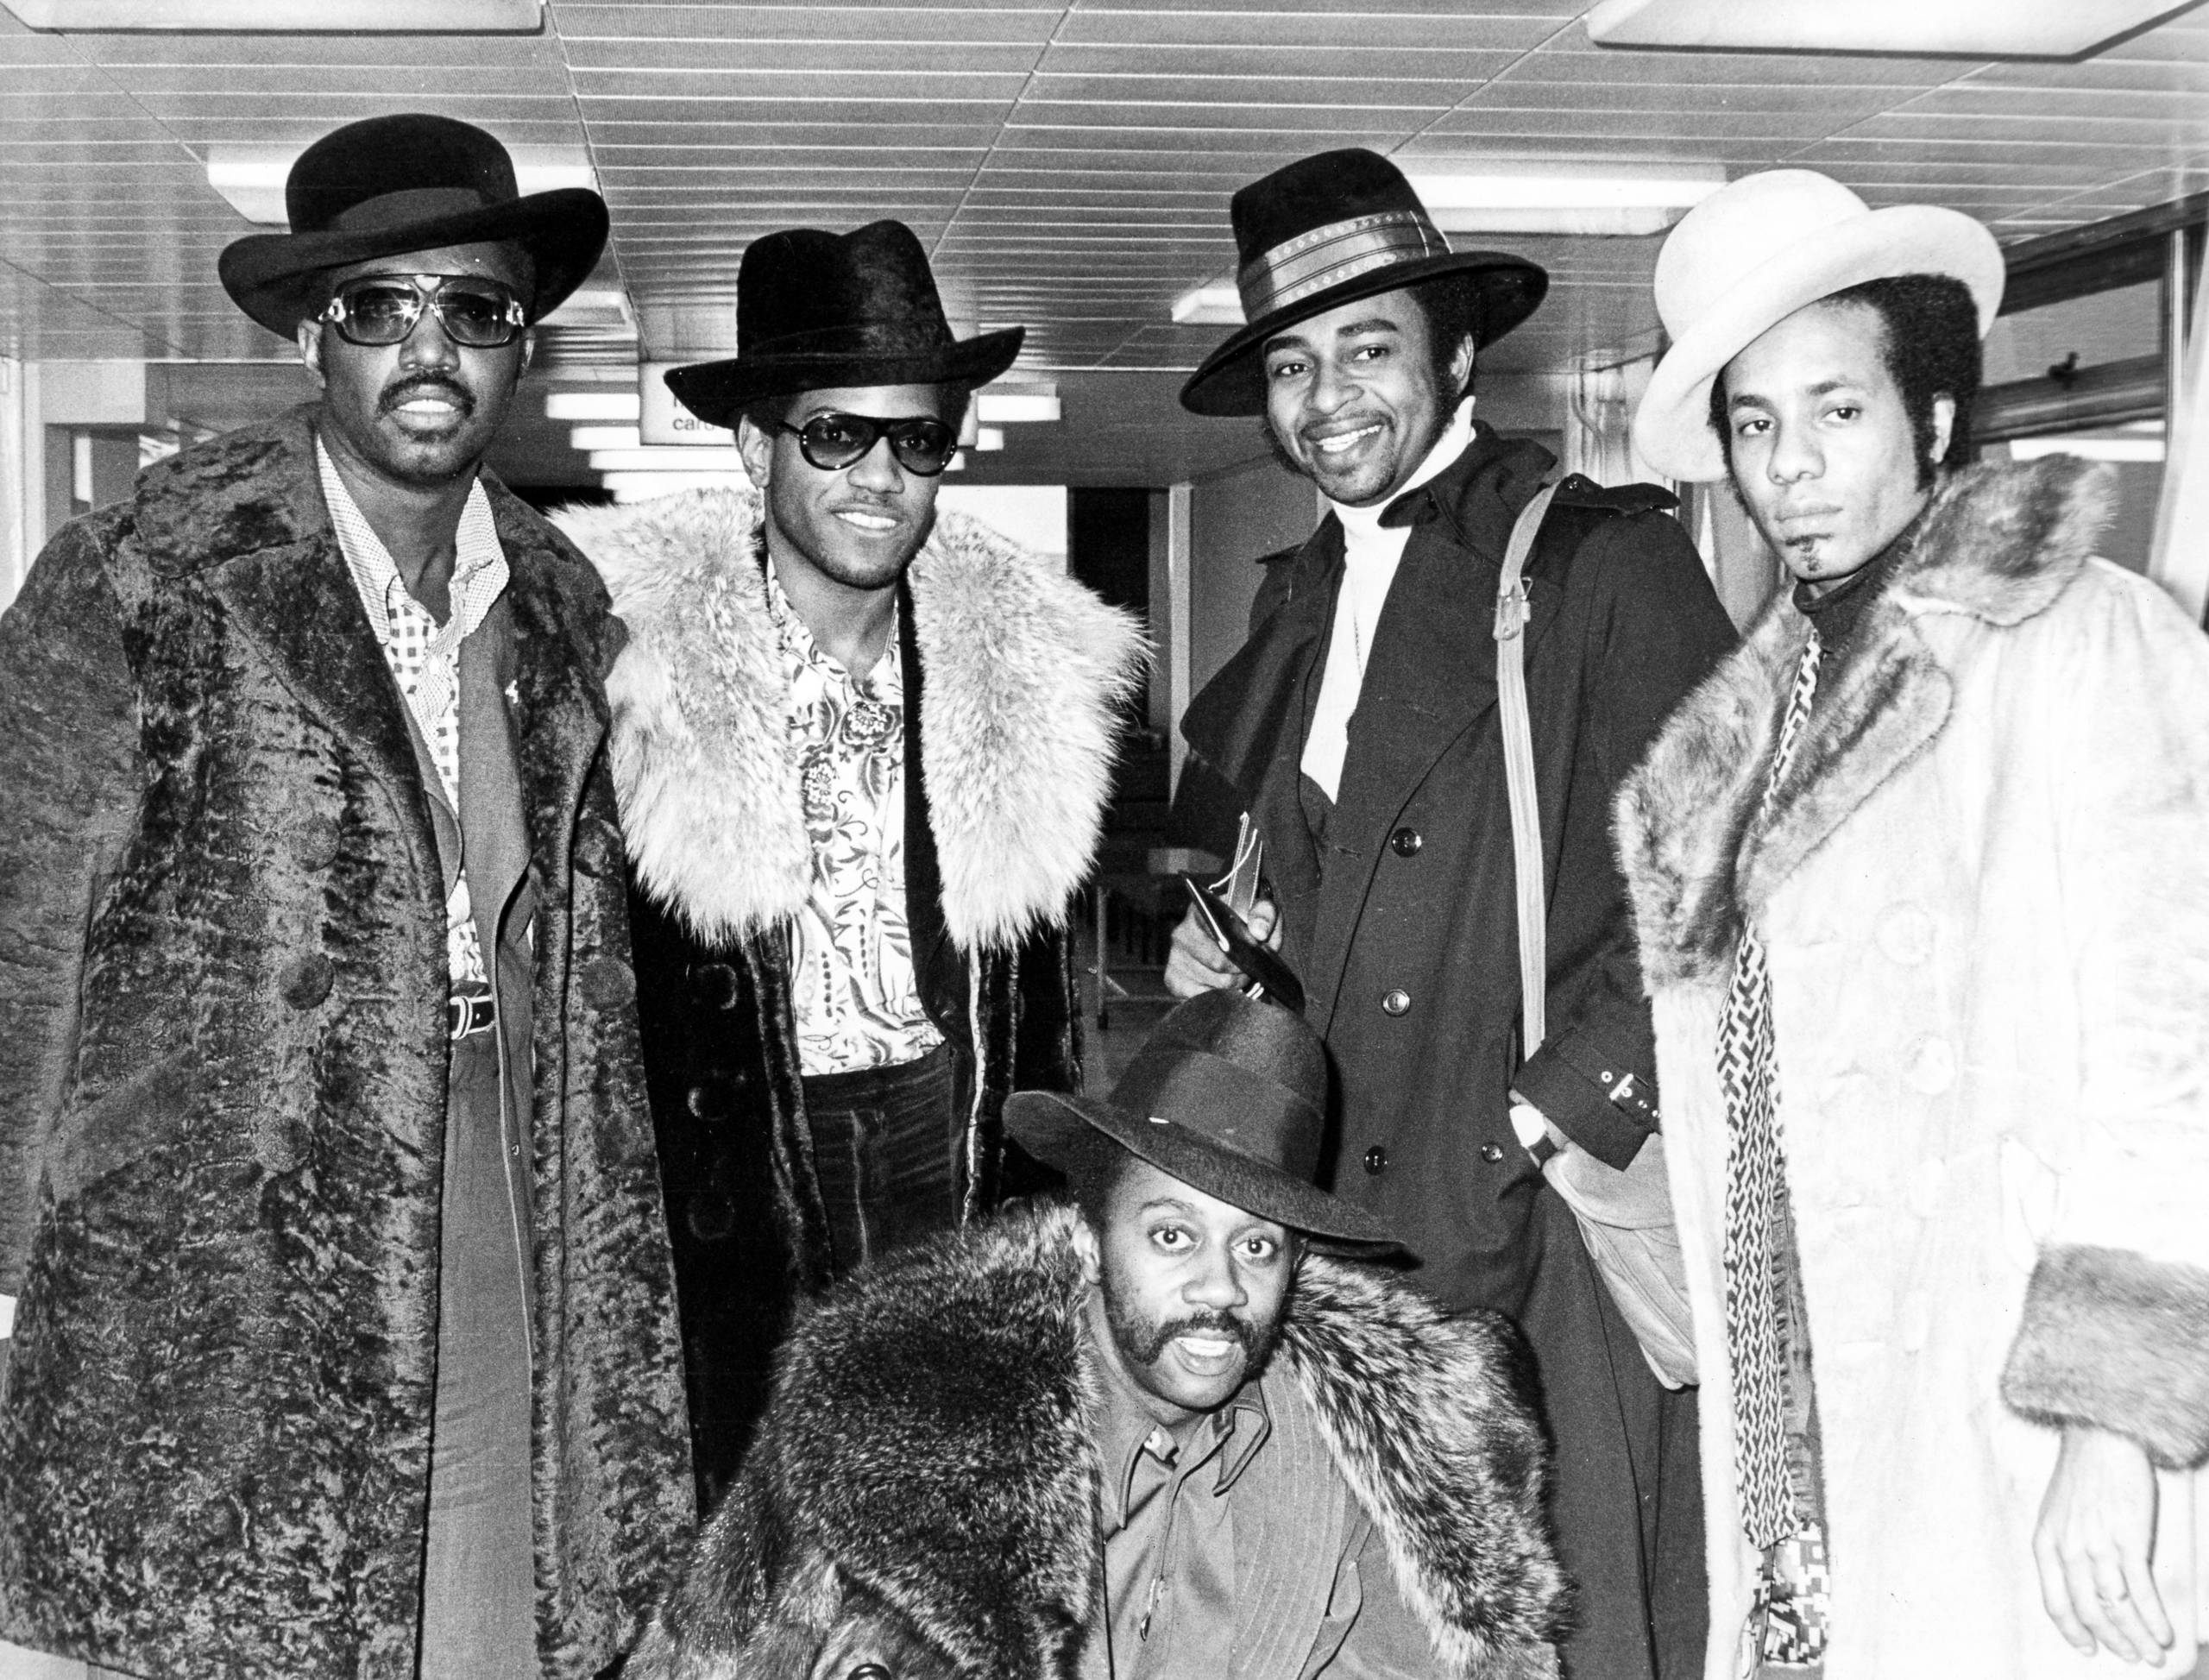 The Temptations, hammersmith odeon. London 1973. (Foto: Marka/Universal Images Group via Getty Images)